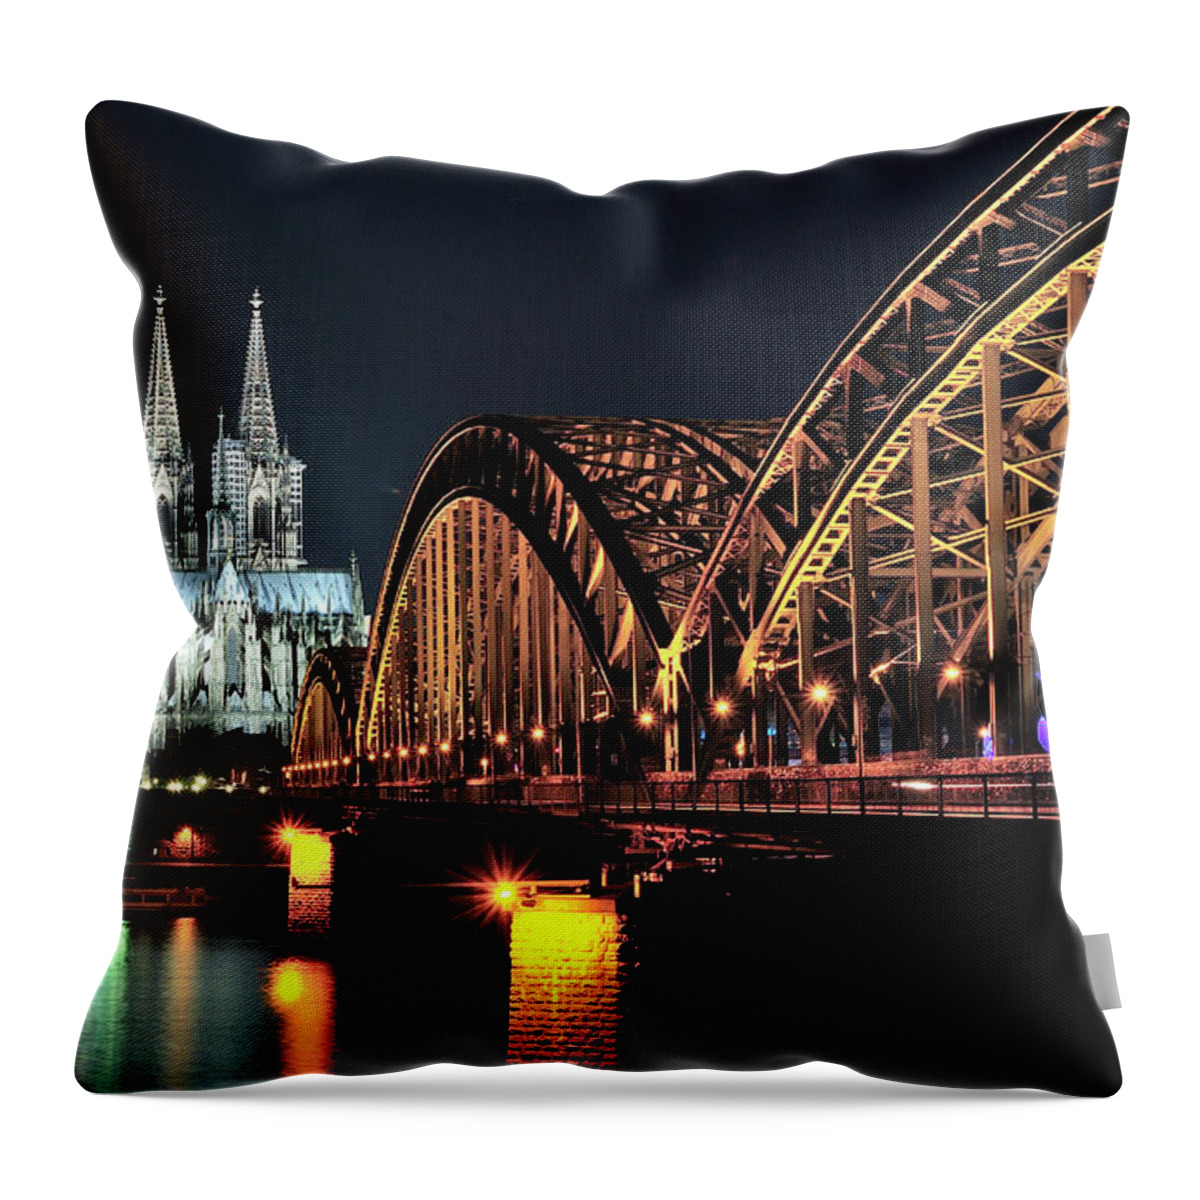 Suspension Bridge Throw Pillow featuring the photograph Cologne Dom And Bridge by Kai O'yang